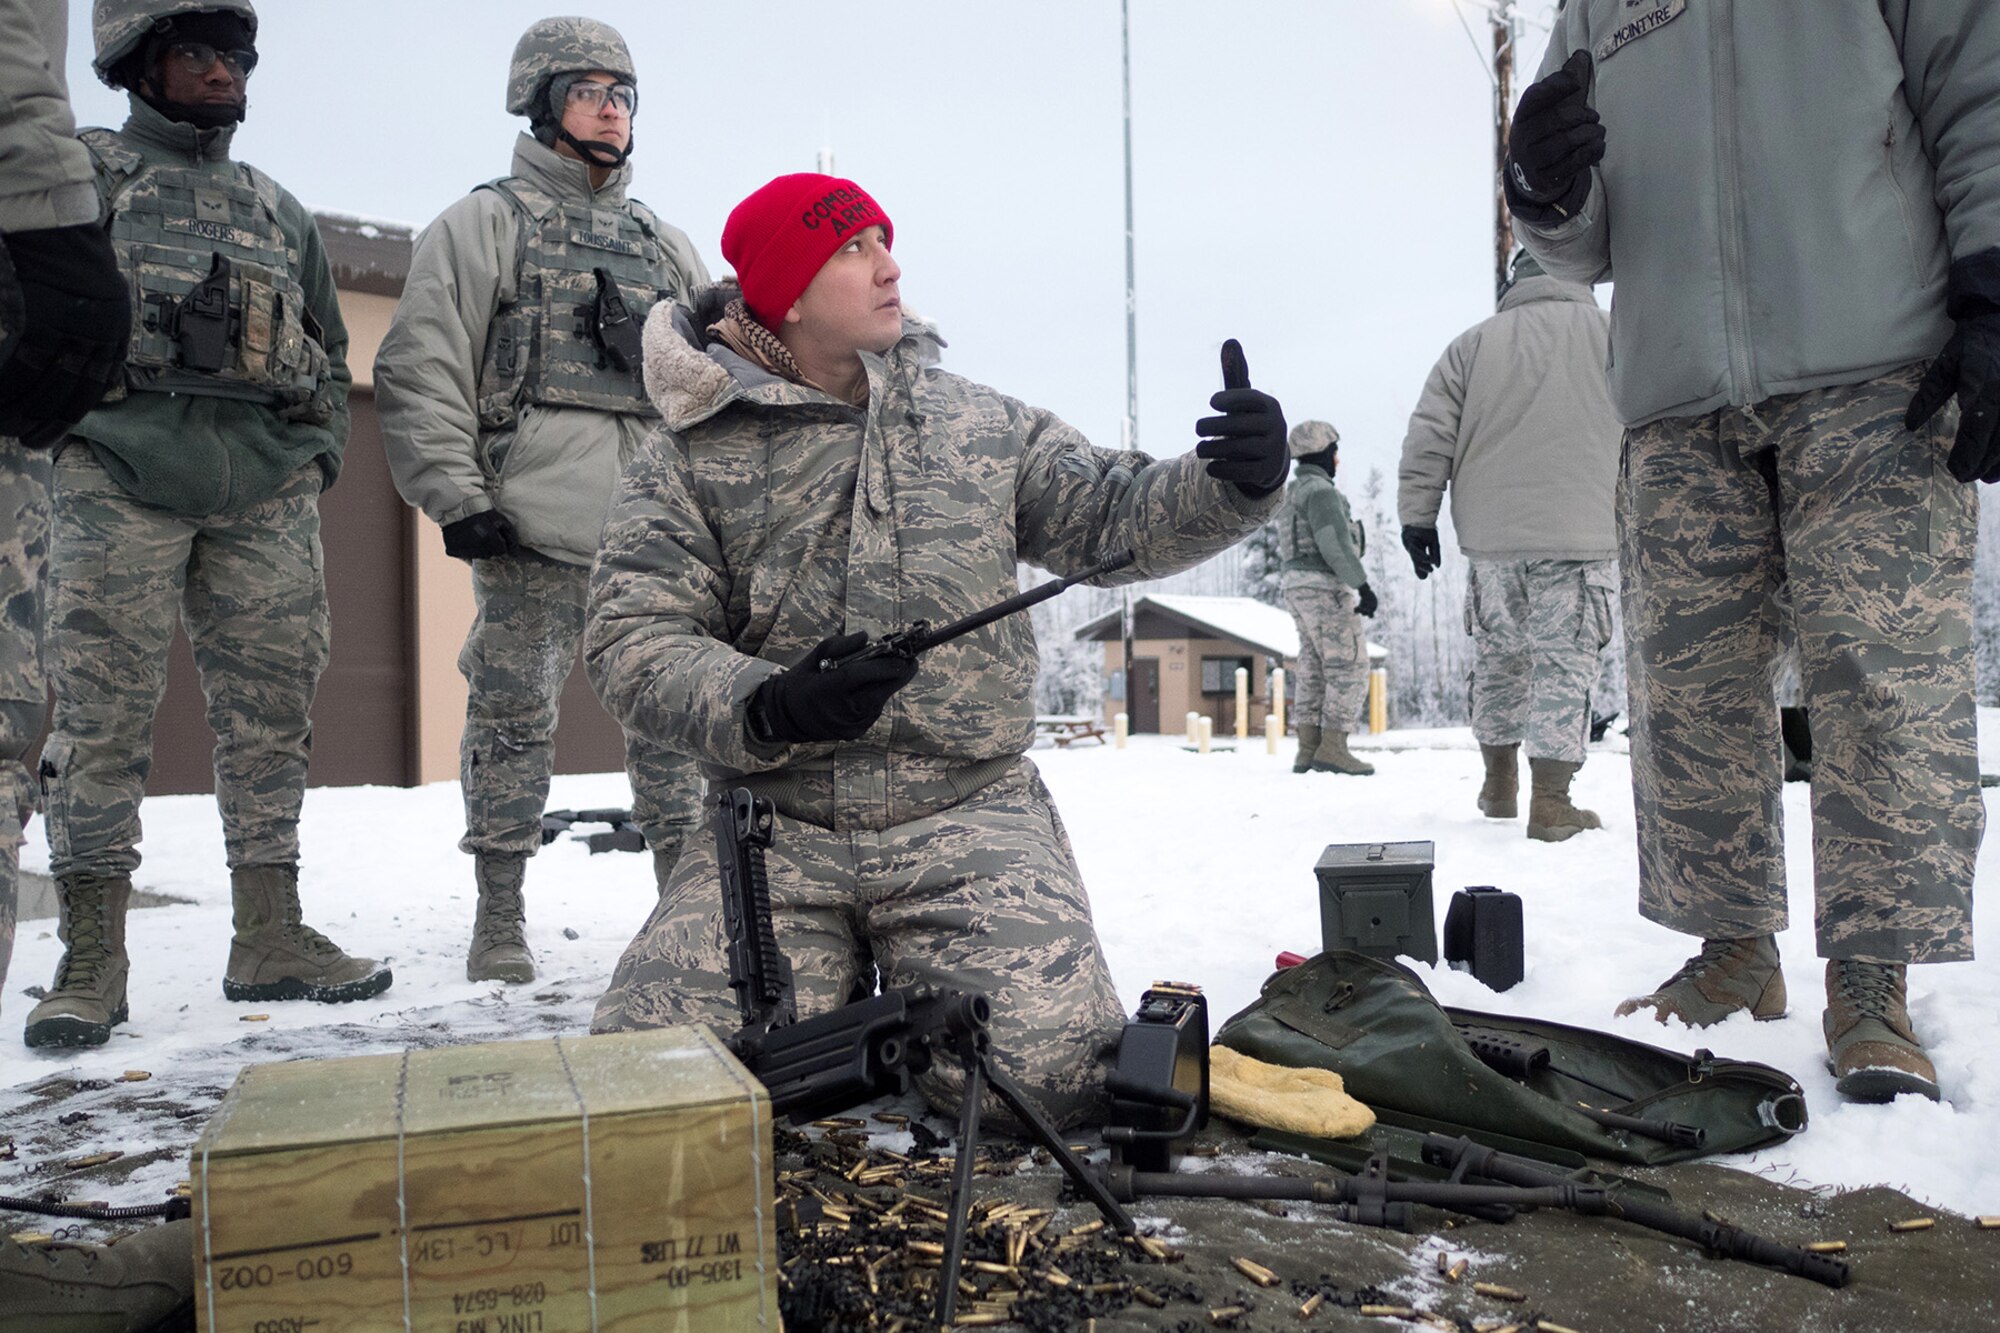 Air Force Staff Sgt. Ruben Salazar, a native of Hansen, Idaho, assigned to the 673d Security Forces Squadron, instructs Airmen on  maintenance of an M249 Squad Automatic Weapon 5.56mm, during a machine gun qualification range on Joint Base Elmendorf-Richardson, Alaska, Jan. 10, 2018. Security Forces Airmen perform extensive training in law enforcement as well as combat tactics to protect U.S. Military bases and assets both stateside and overseas.